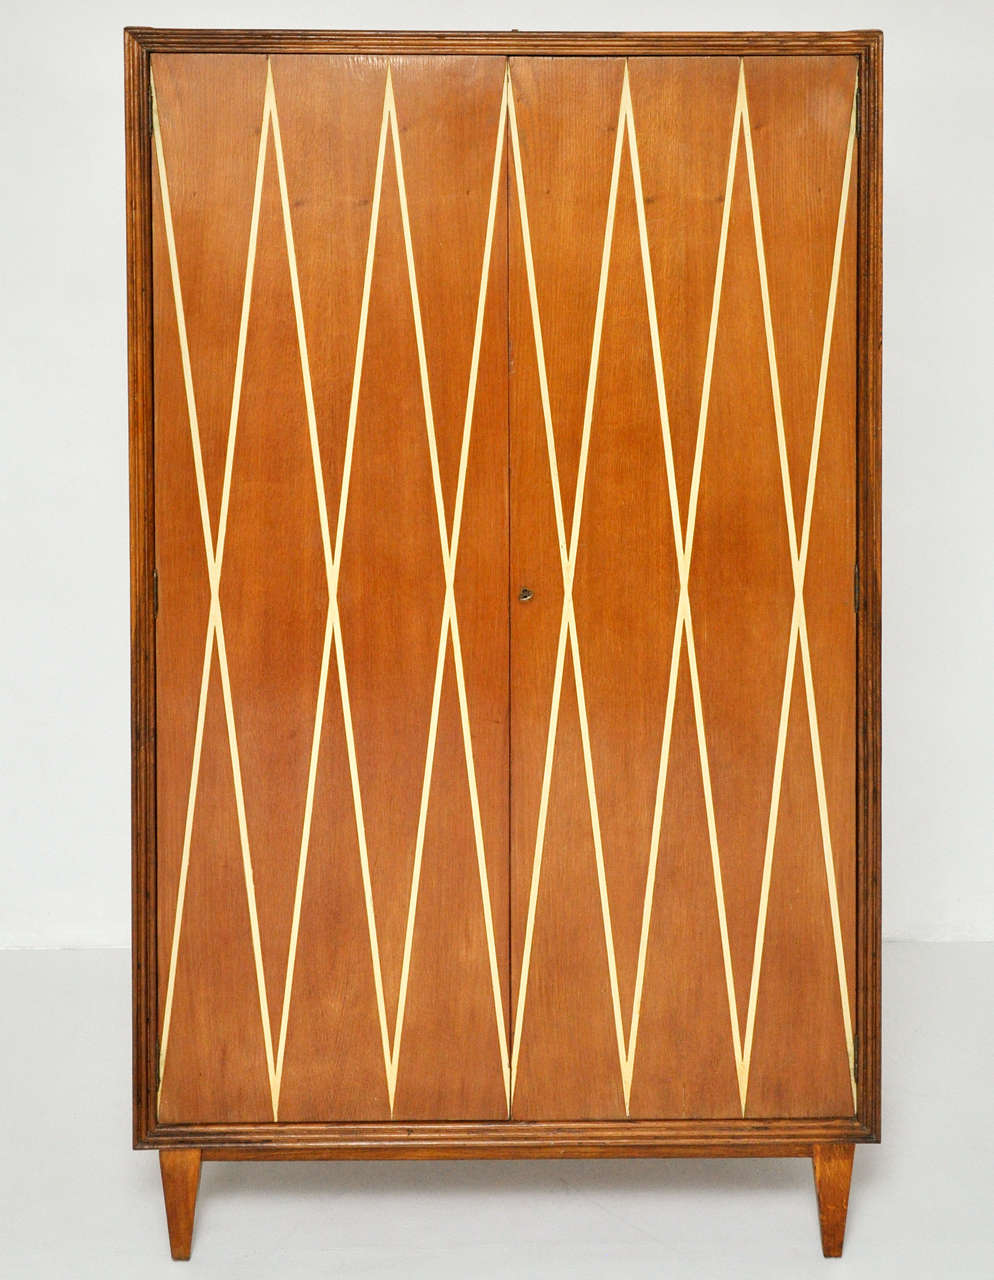 1950's wardrobe cabinet.  Made in Italy.  Great diamond pattern design on doors.

**A second cabinet made to accompany this cabinet is also available, as well as matching pair of nightstands.